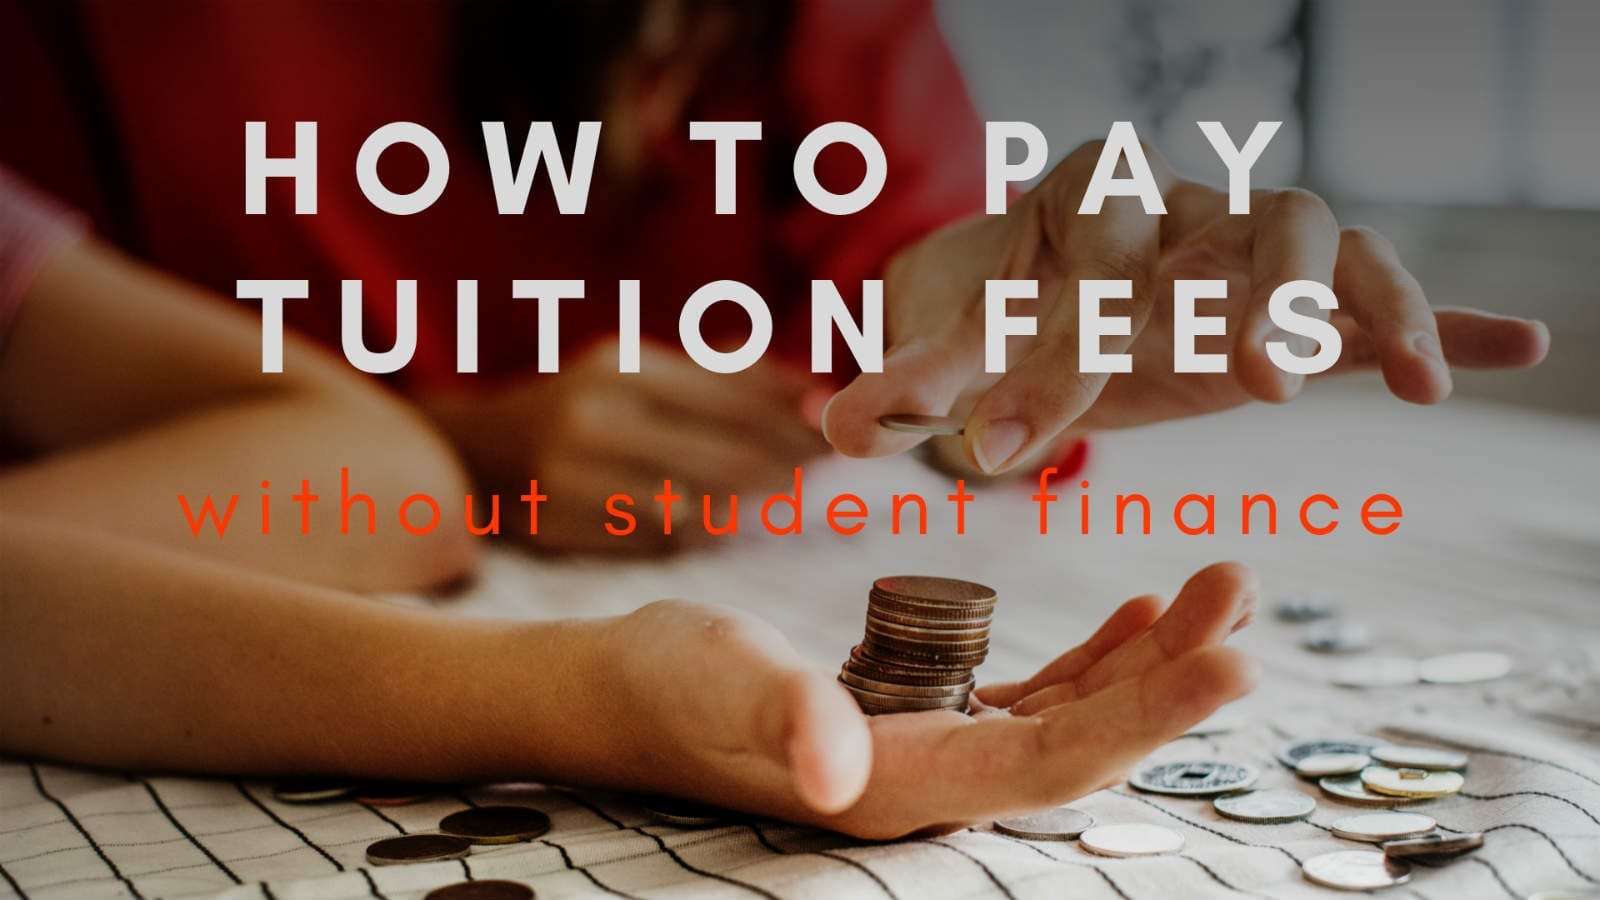 How to Pay Tuition Fees without Student Finance